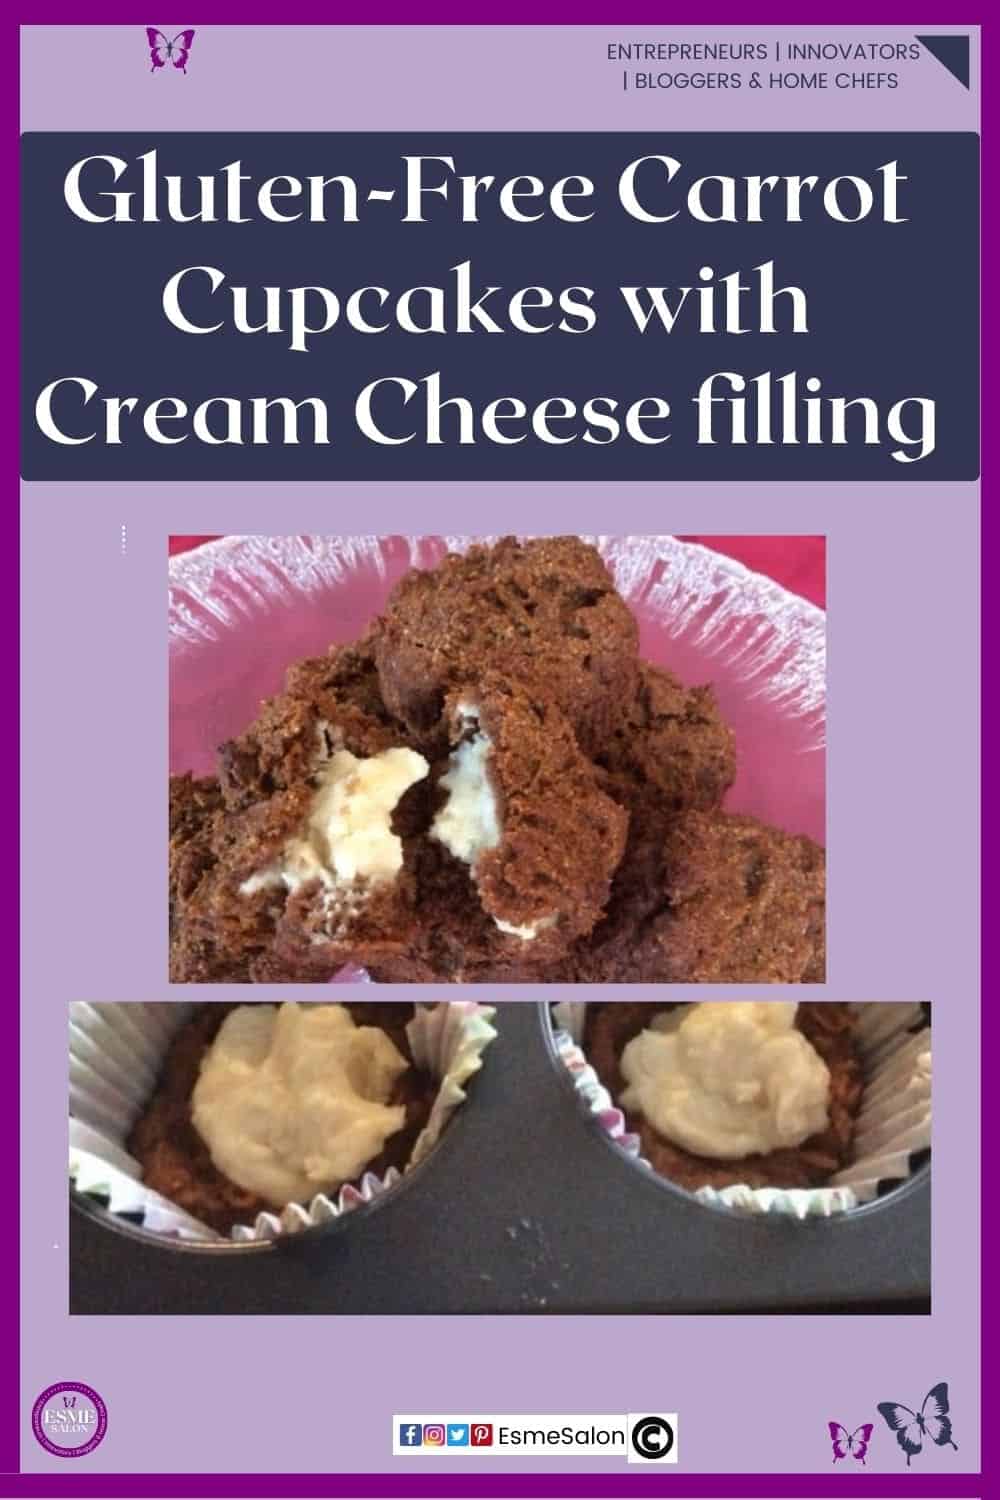 an image of a glass cake stand with Gluten-Free Carrot Cupcakes with Cream Cheese filling as well as one in a cupcake casing prior to being baked